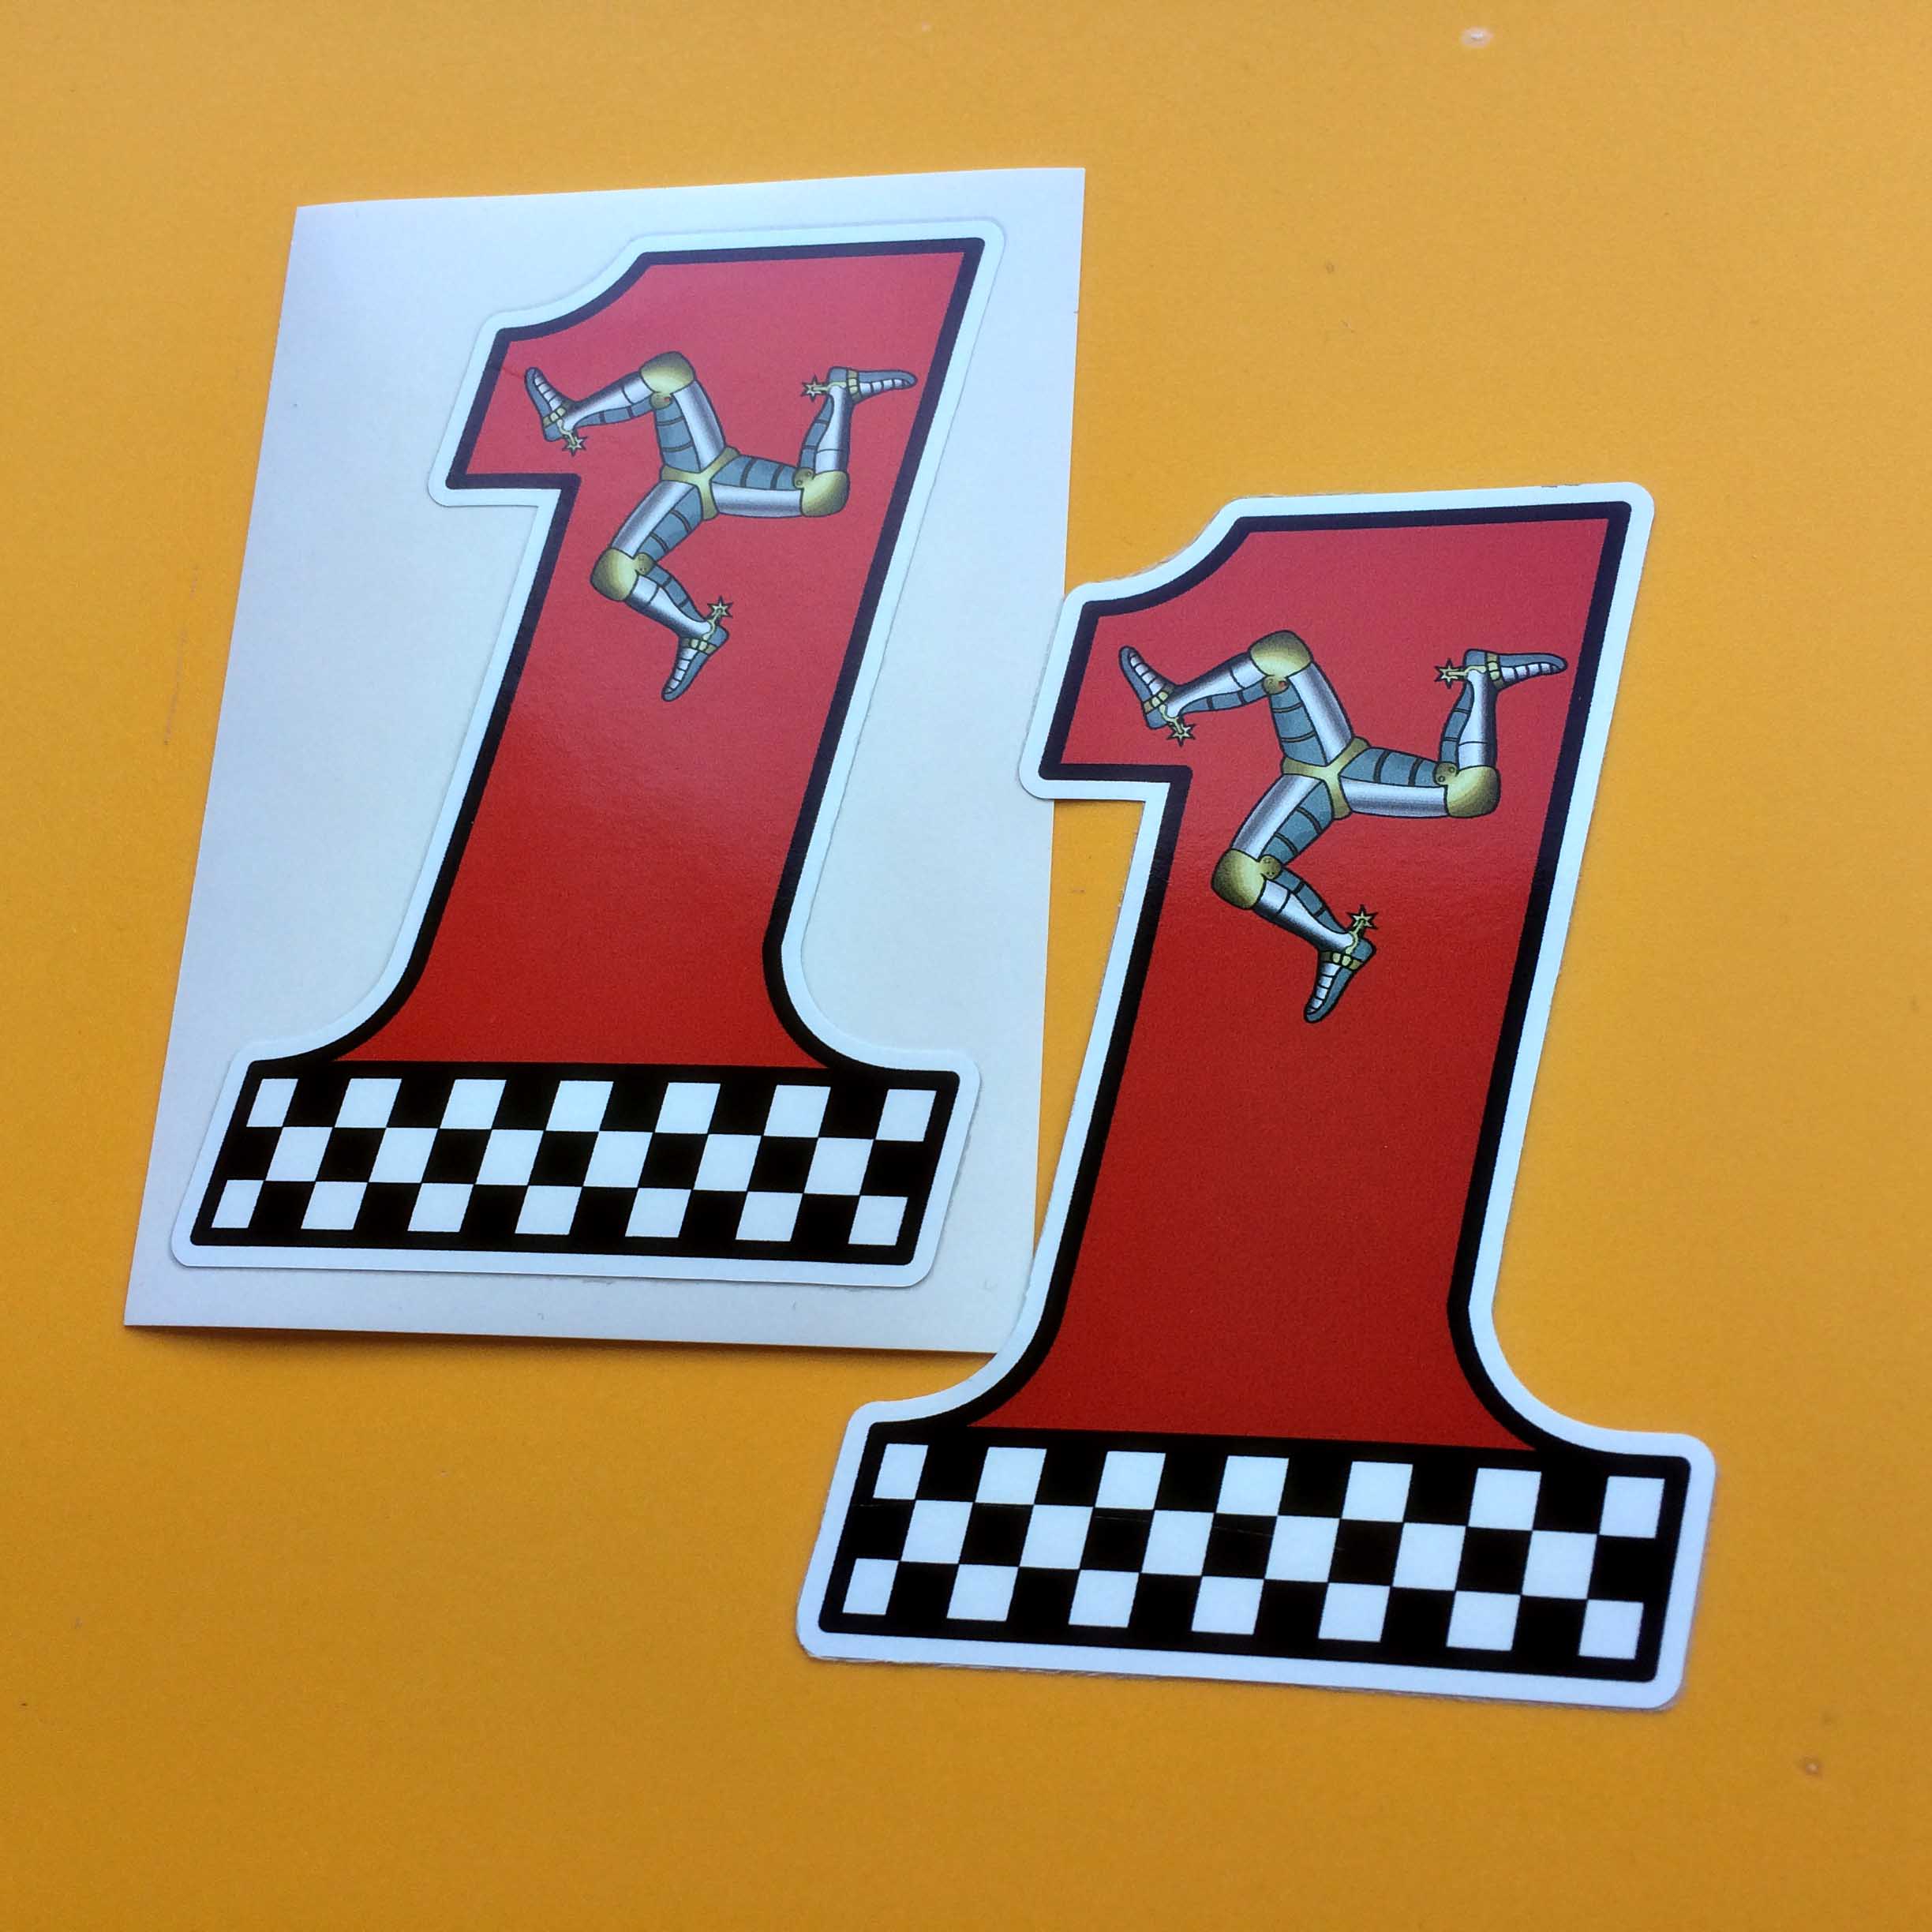 ISLE OF MAN CHEQUERED NO 1 STICKERS. A number 1 in red with a black and white chequered base. At the top is a triskelion; three armoured legs with golden spurs.